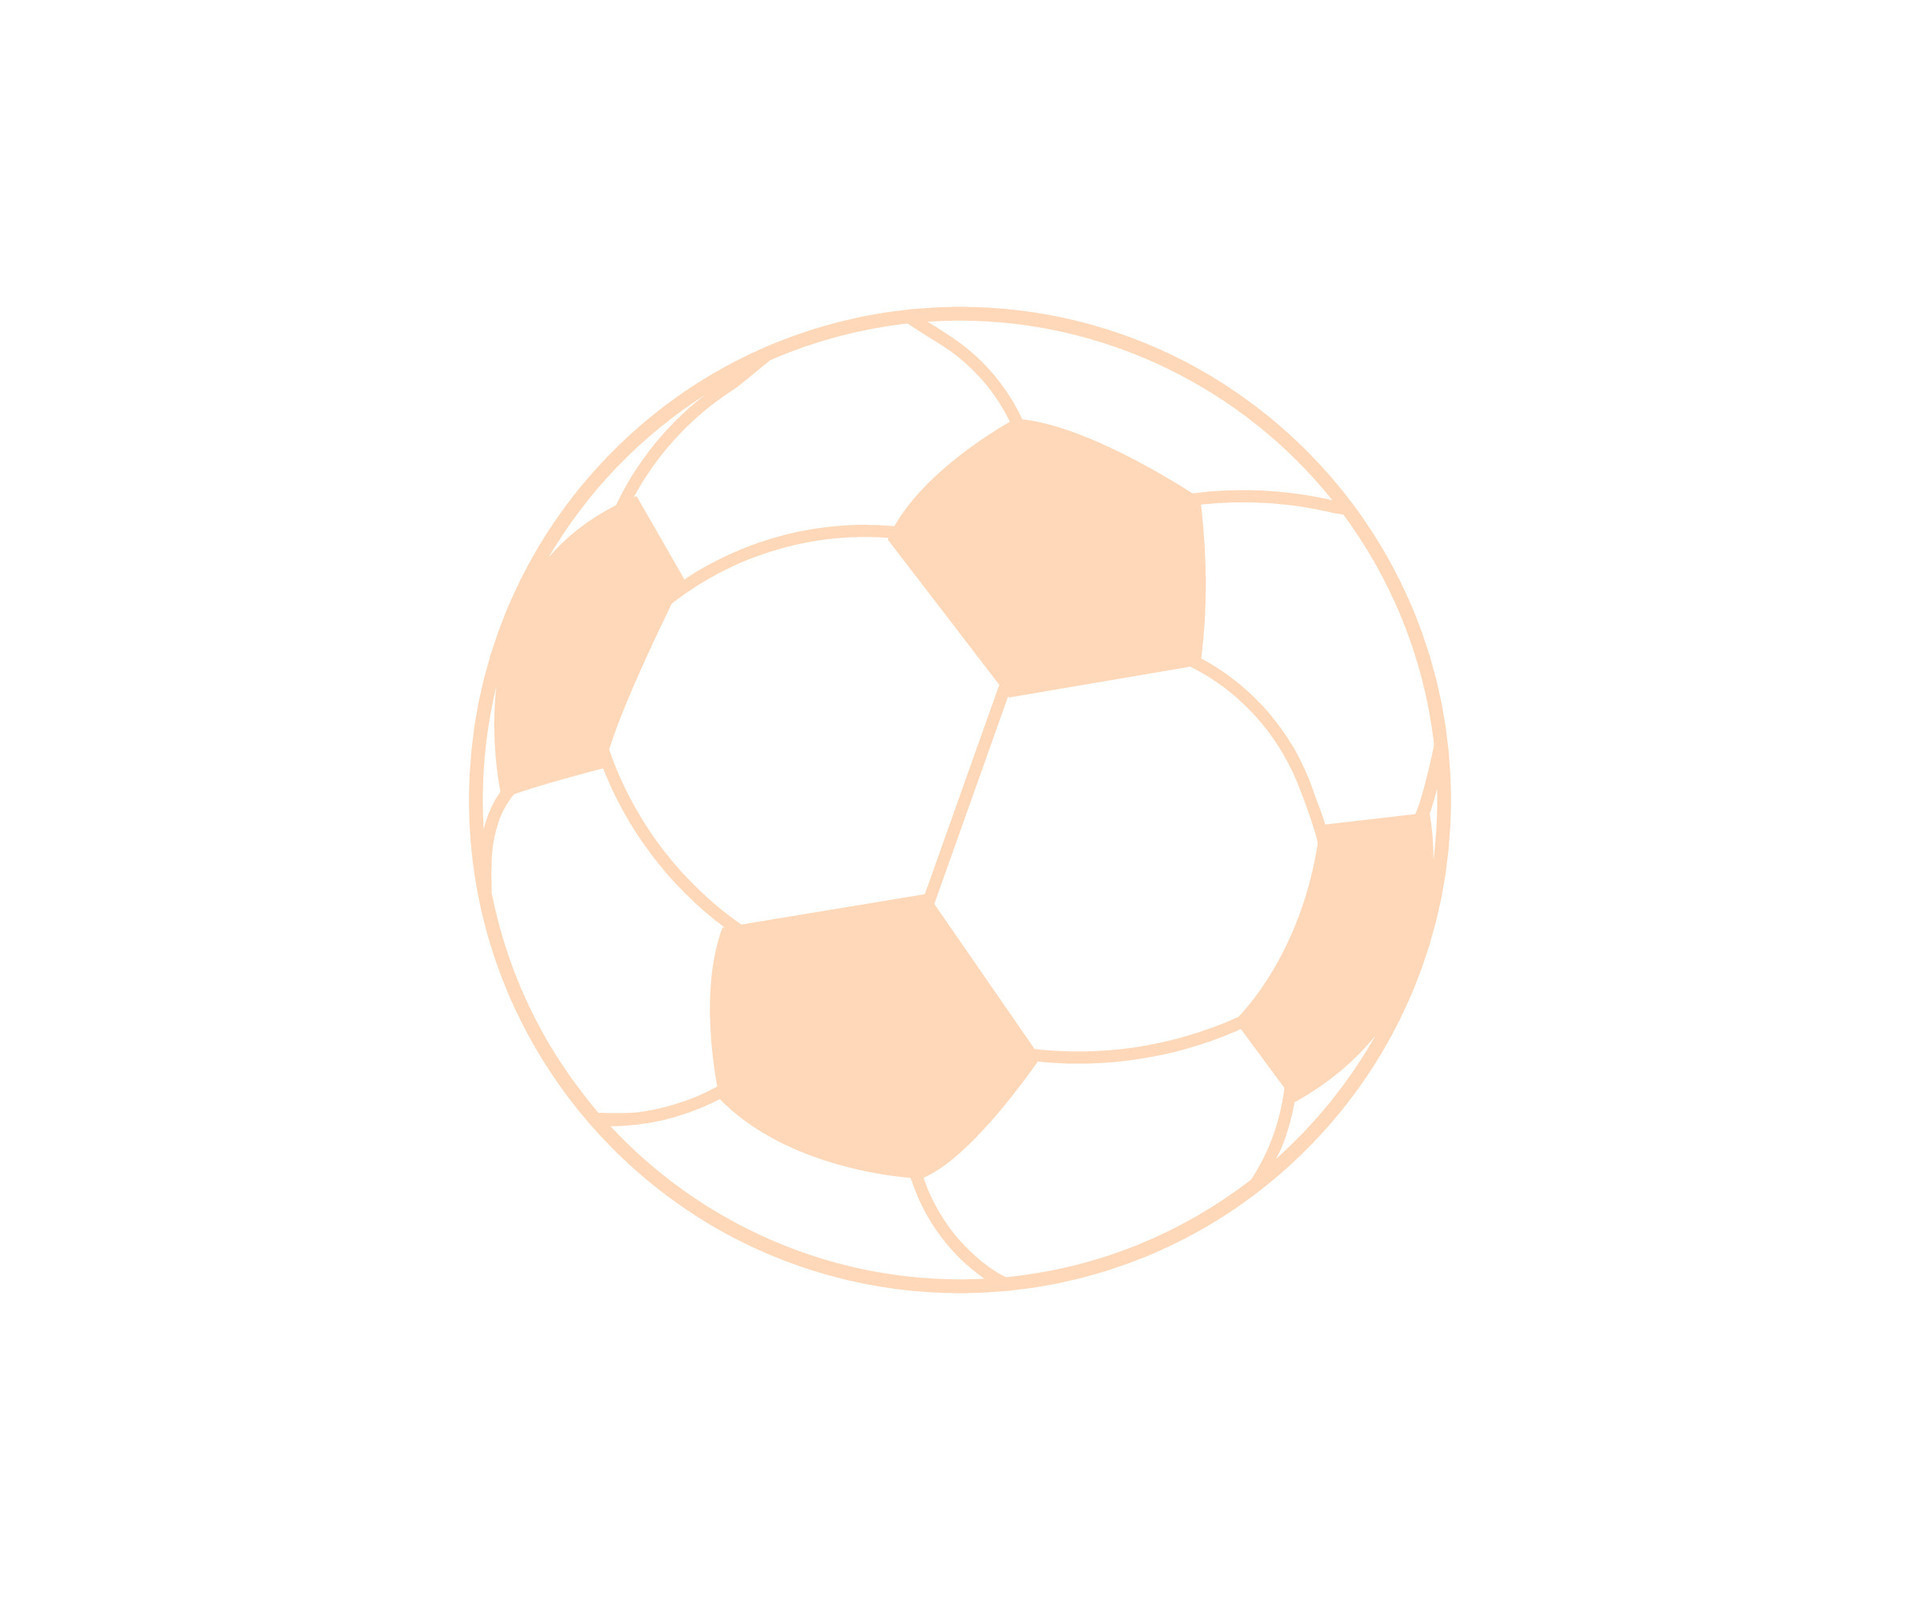 Peach Football Line Art Drawing Vector Art, Icons, and Graphics